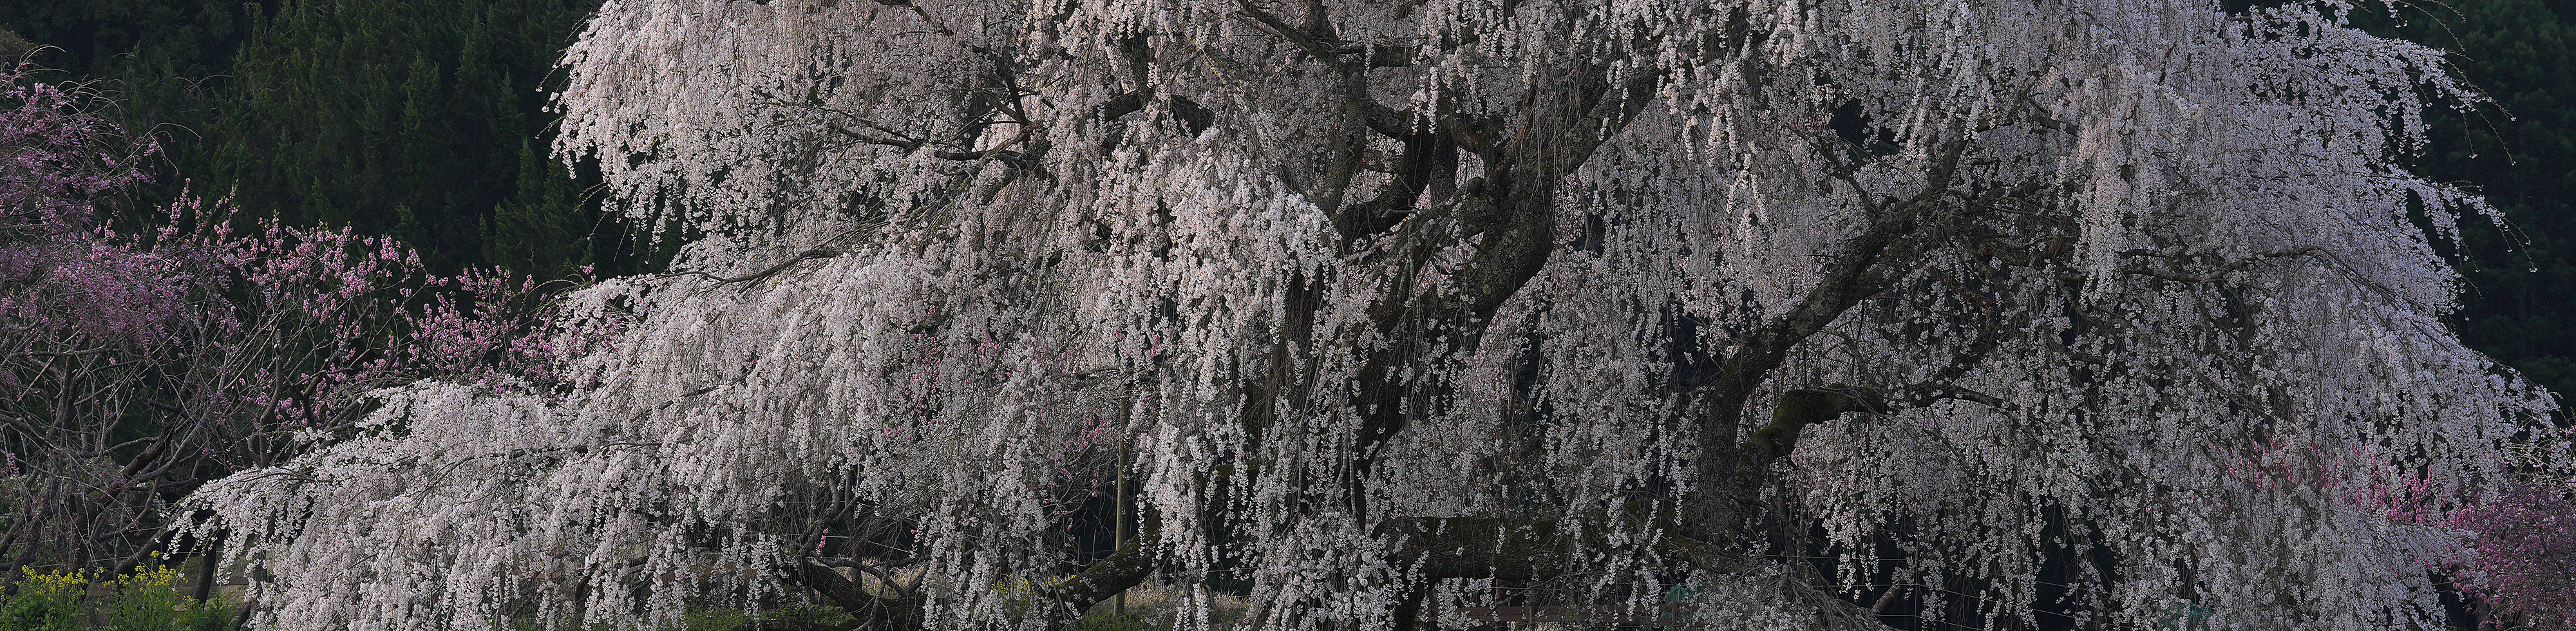 Image of cherry blossoms at their peak